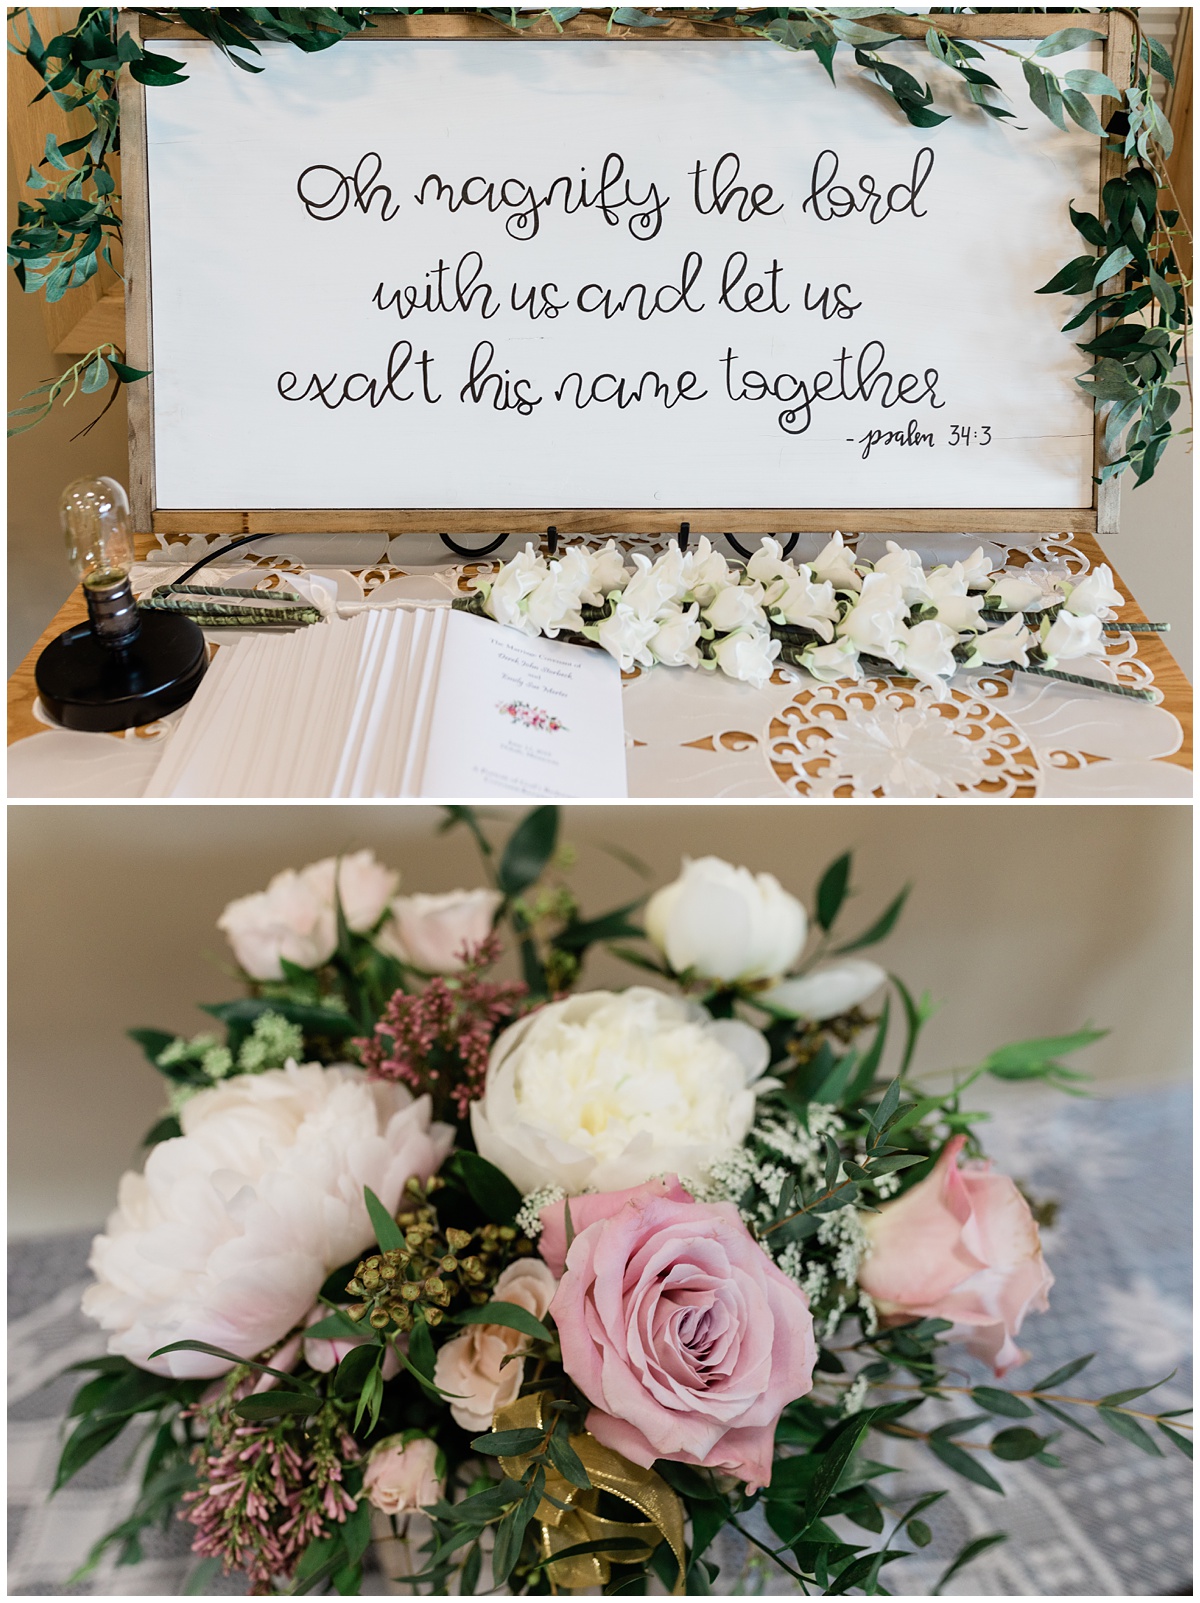 gorgeous florals and decor at a lovely mount of olives wedding in Duluth, MN. Images by Comfort & Cashmere.